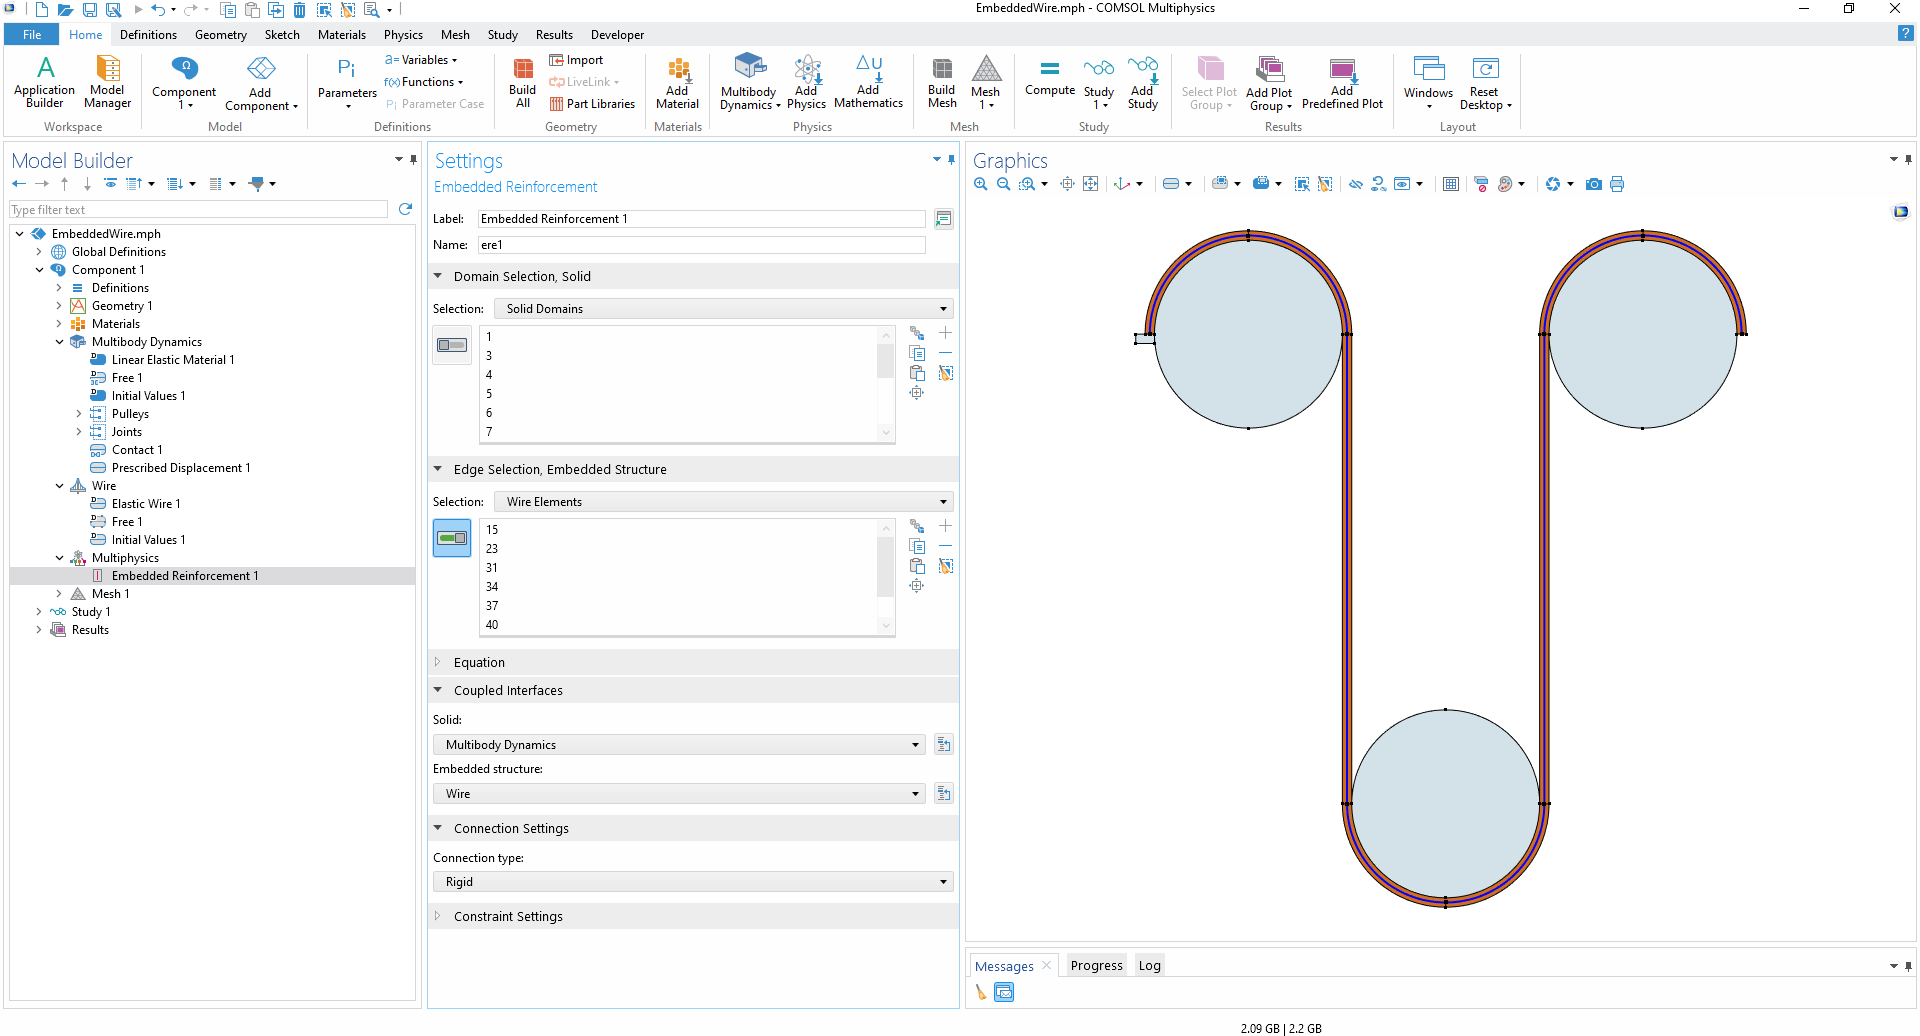 The COMSOL Multiphysics UI showing the Model Builder with the Embedded Reinforcement node highlighted, the corresponding Settings window, and a cable–pulley model in the Graphics window.